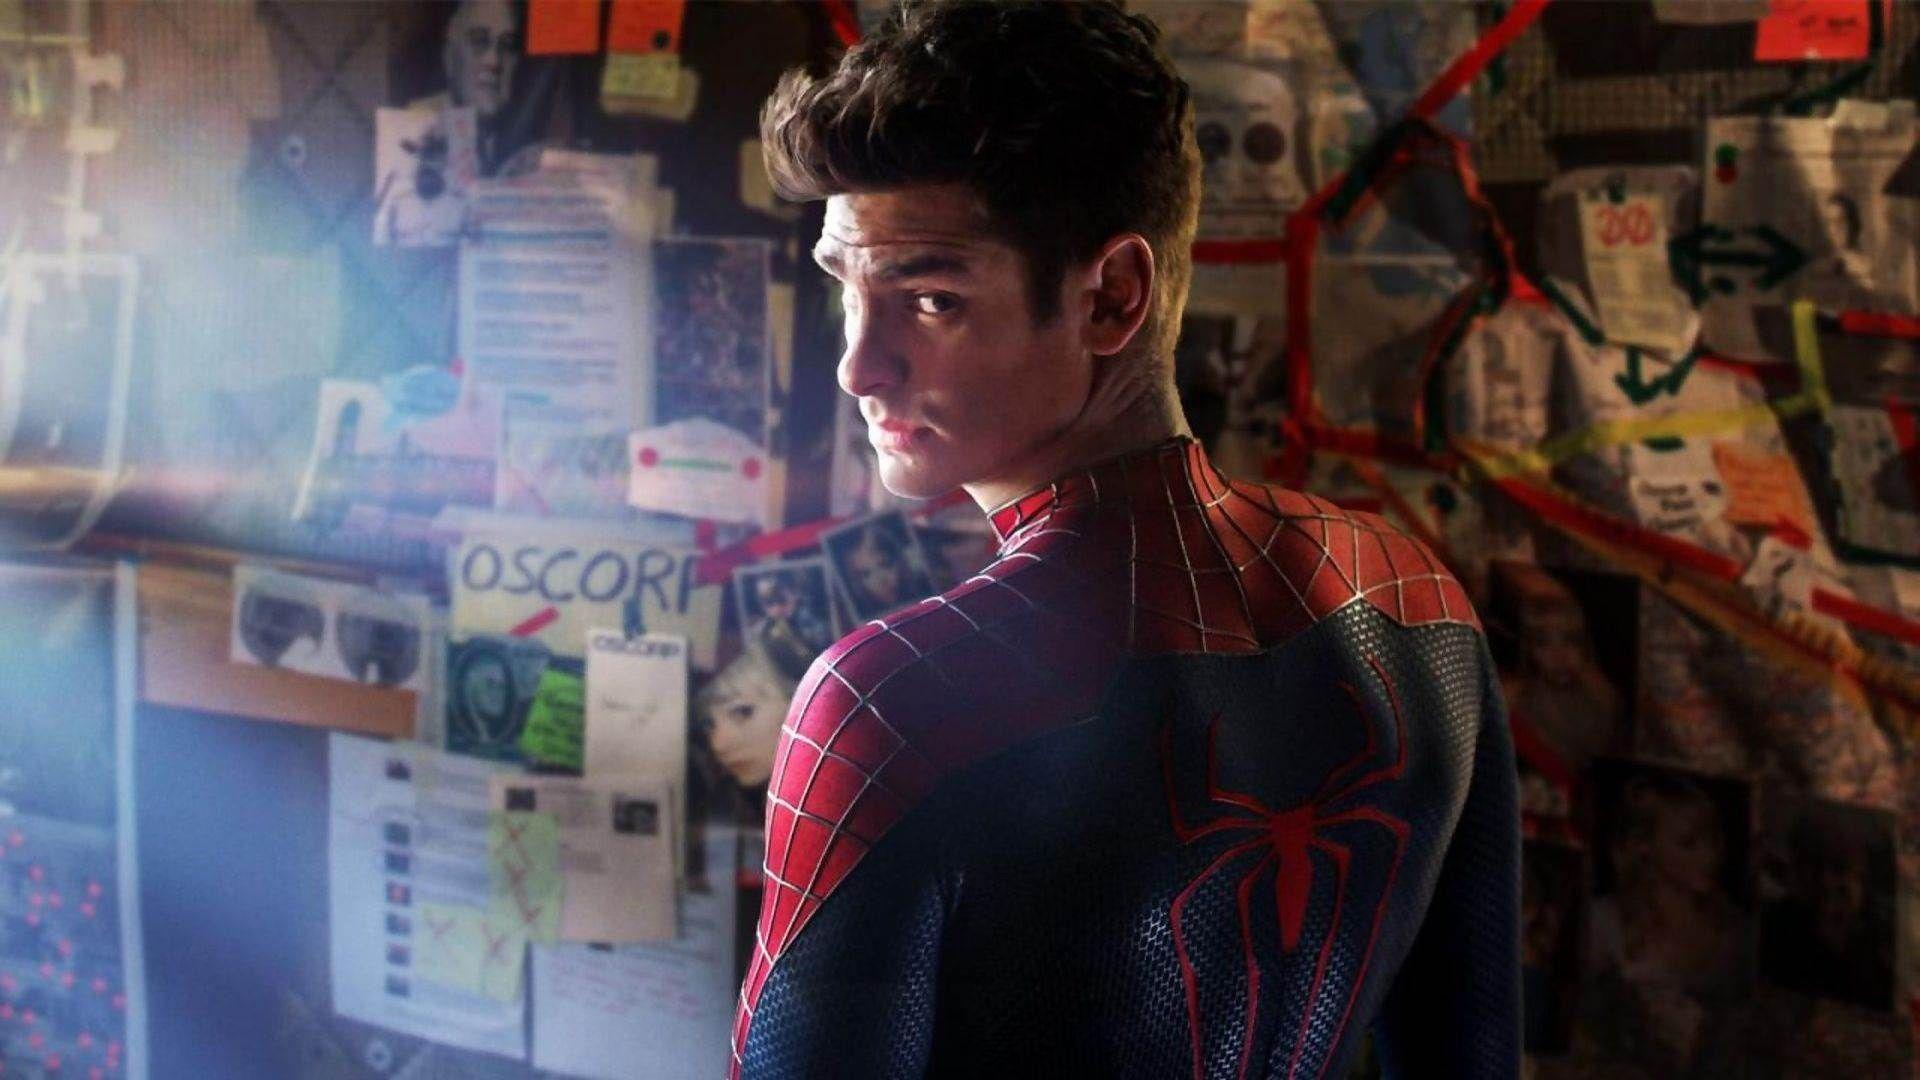 Andrew Garfield as Spider-Man in The Amazing Spider-Man 2 - Andrew Garfield